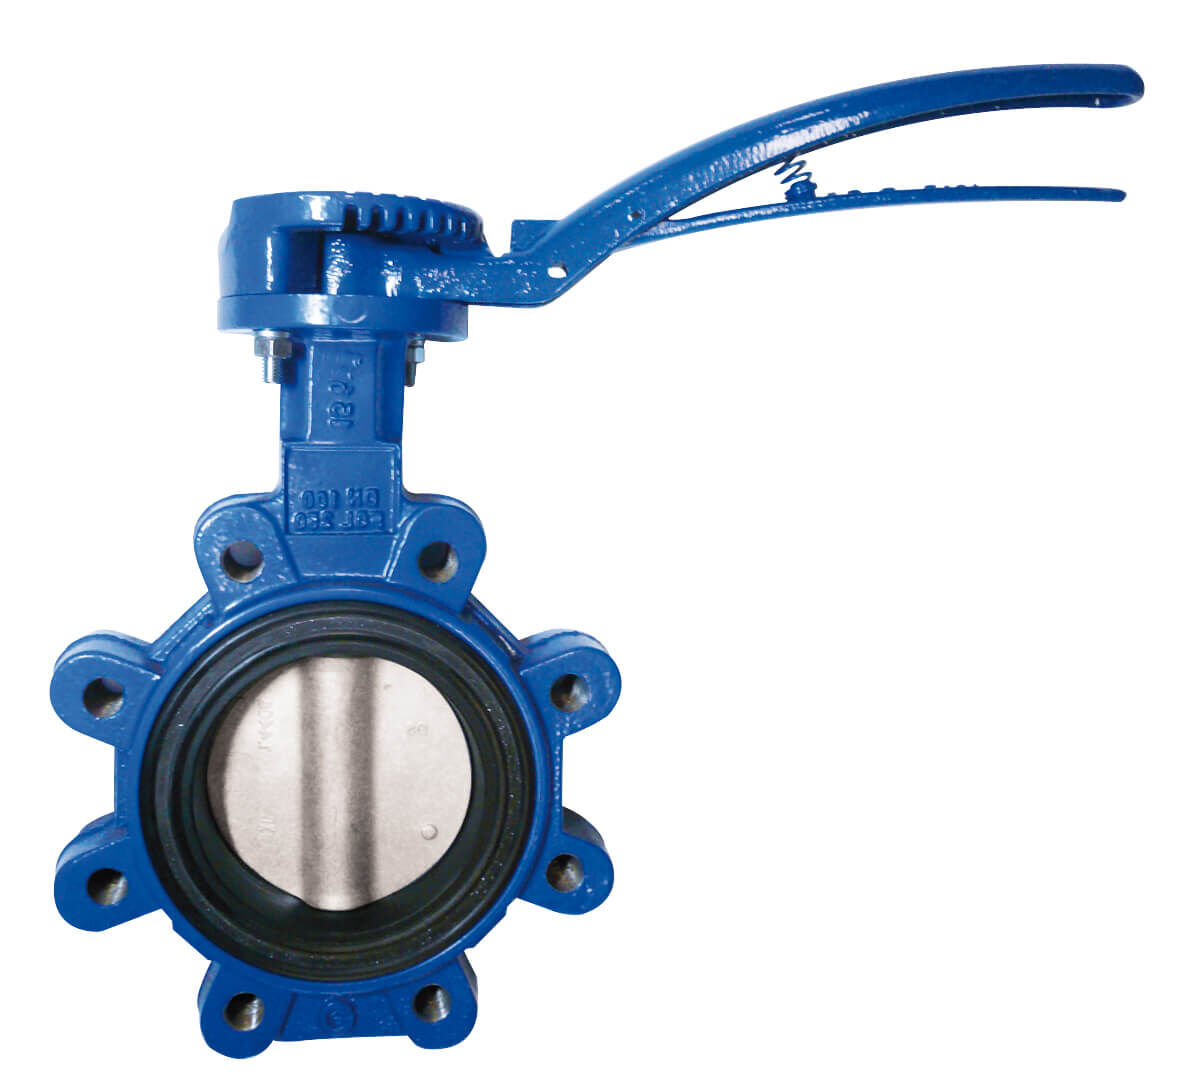 sylax lug type butterfly valve cast iron dn50 15 or ductile iron dn200 300